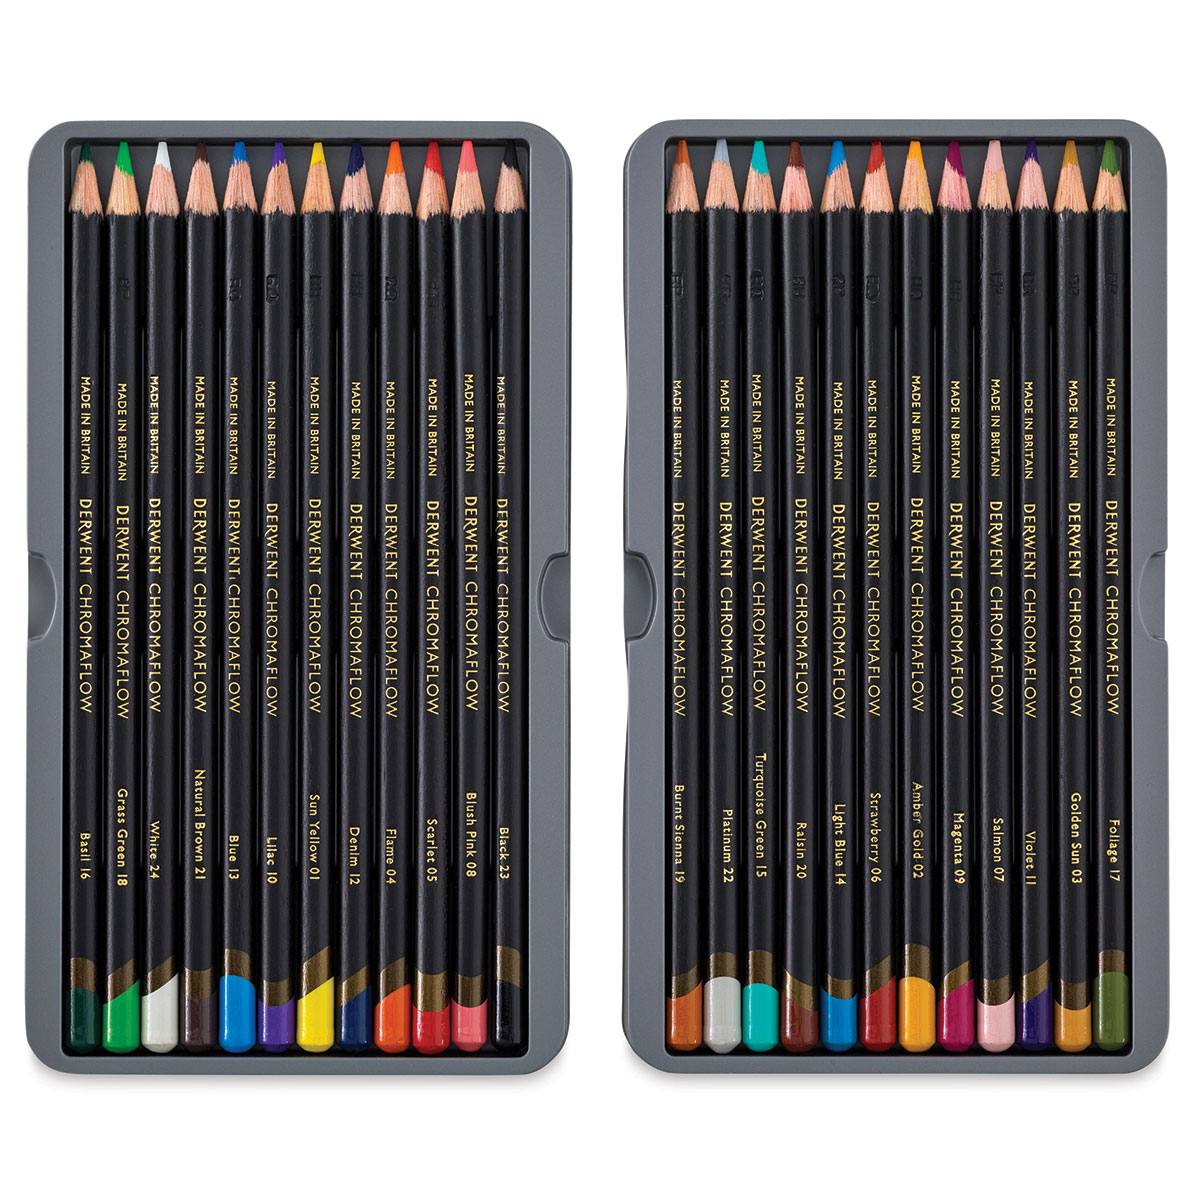 Derwent Drawing 24 Set of Coloured Pencils: Swatch, Review, Comparison &  Time Lapse Drawing 